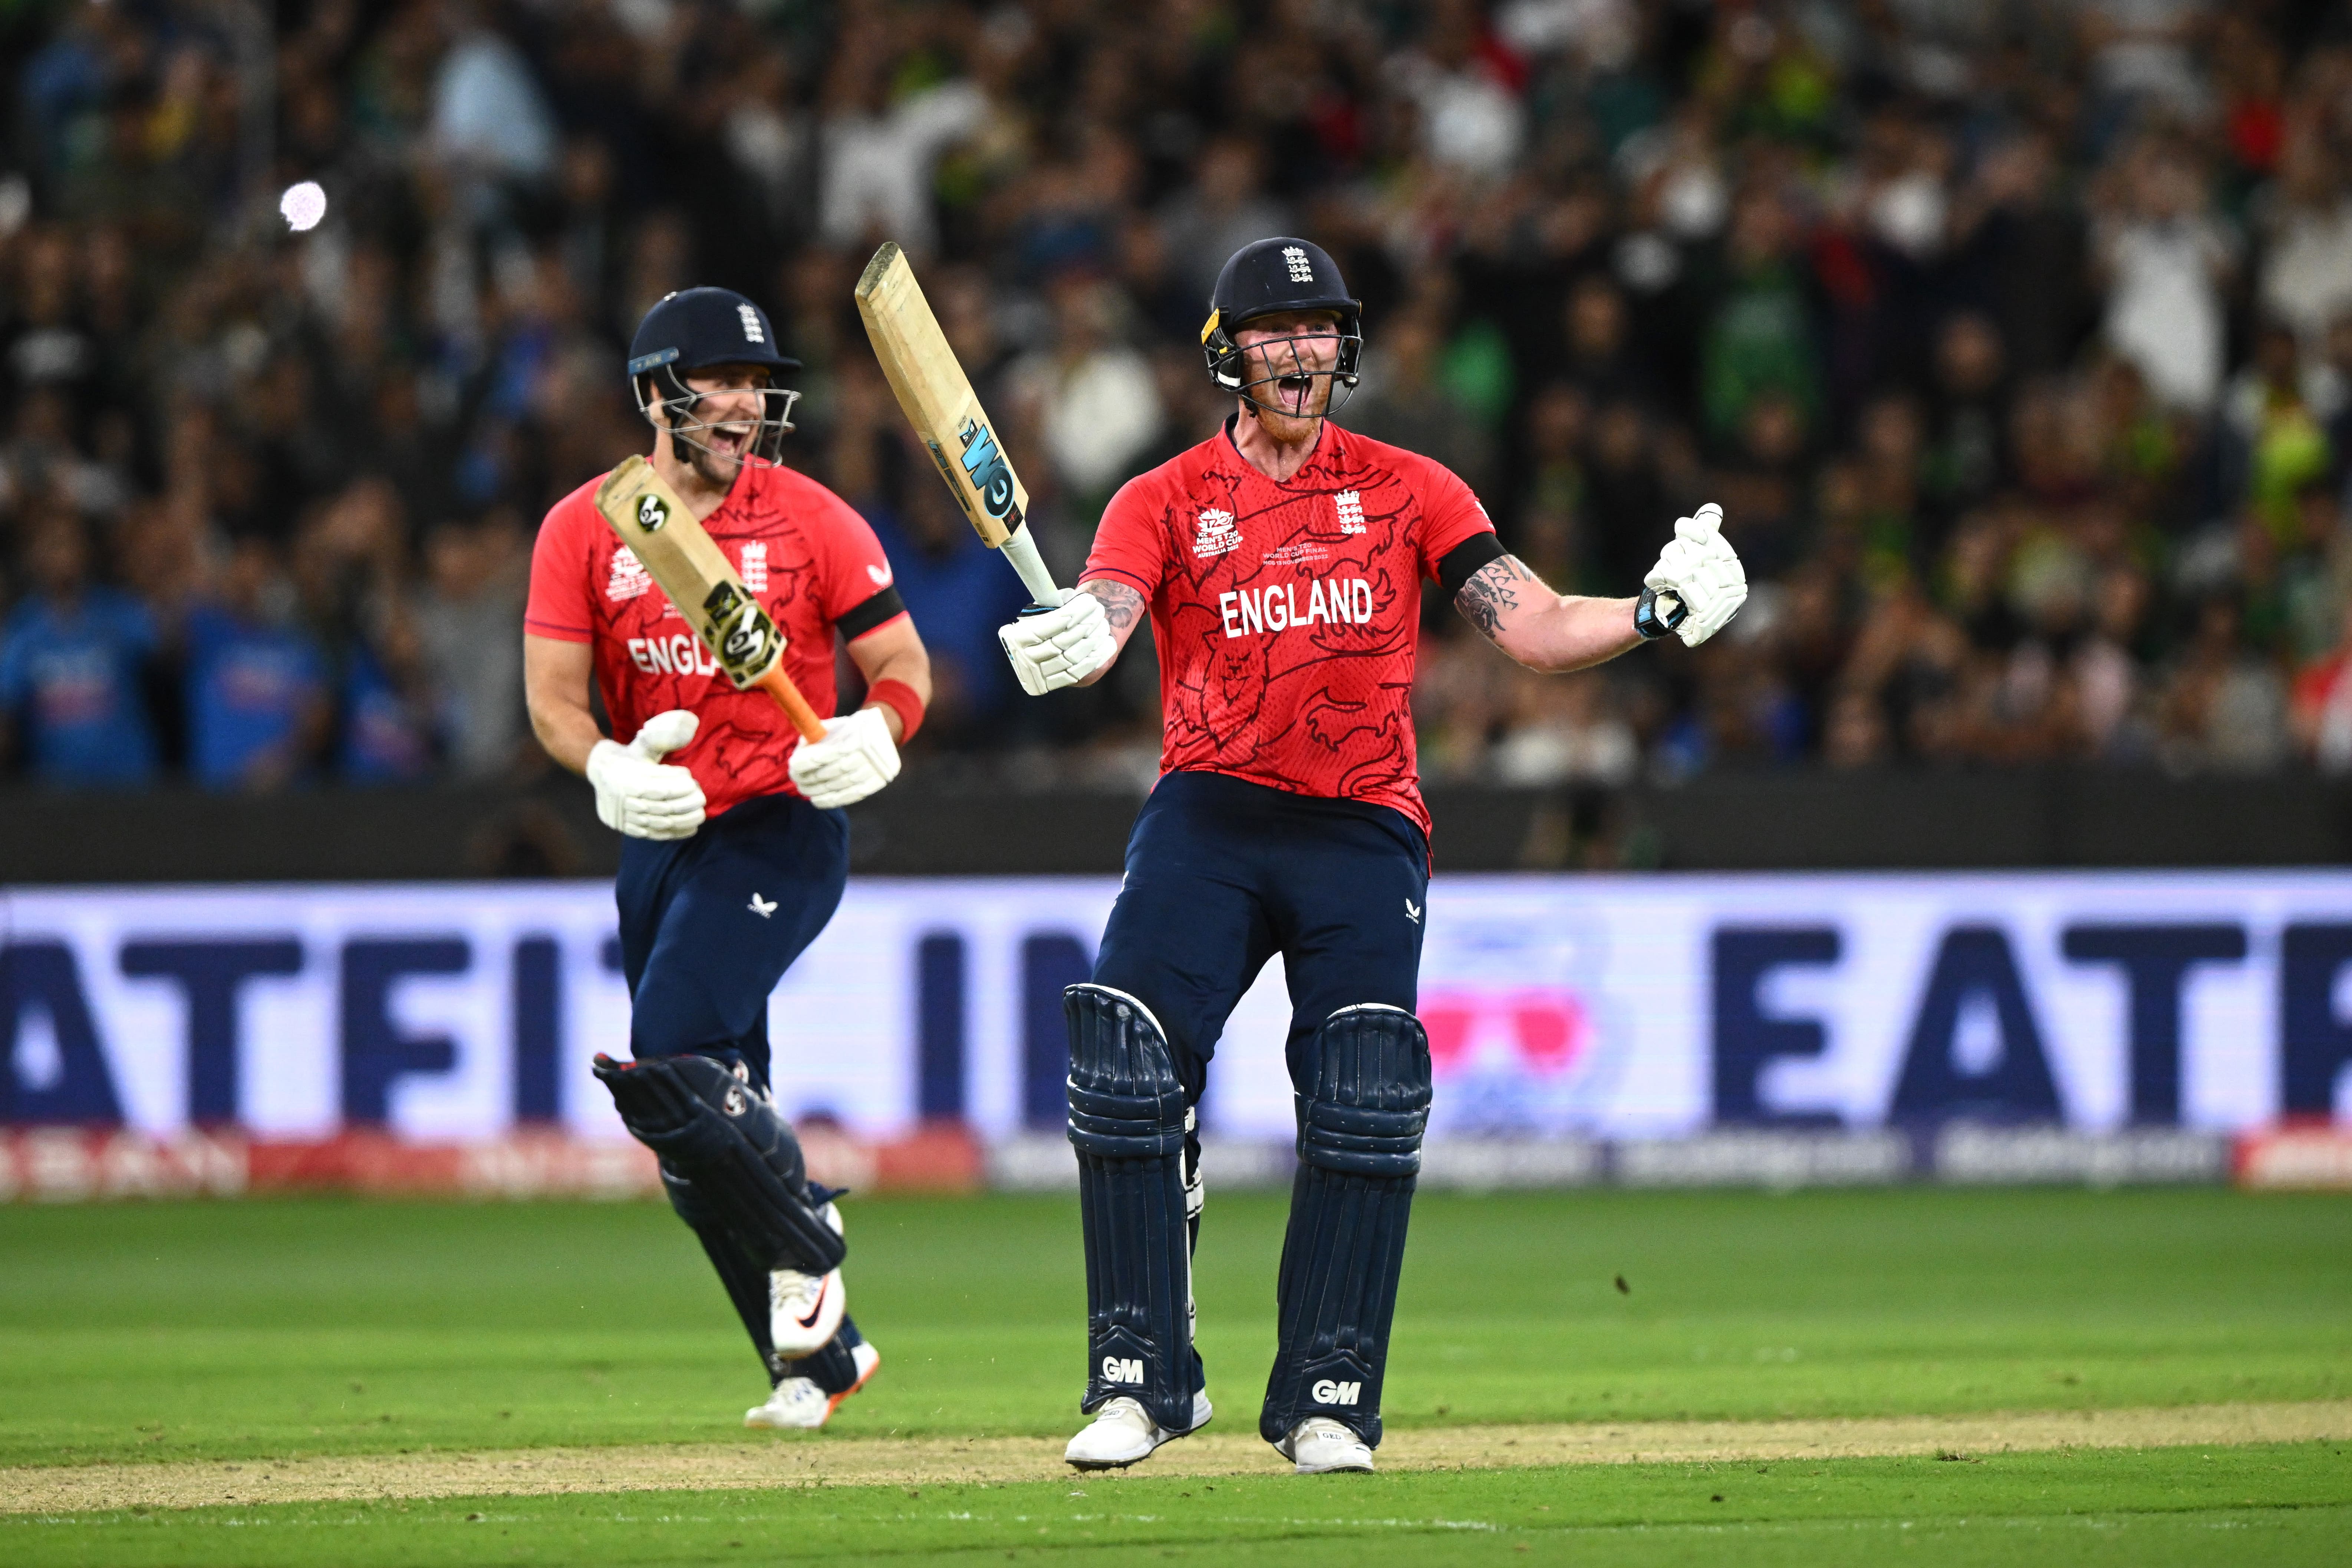 A look at England’s record in World Cup finals after their latest